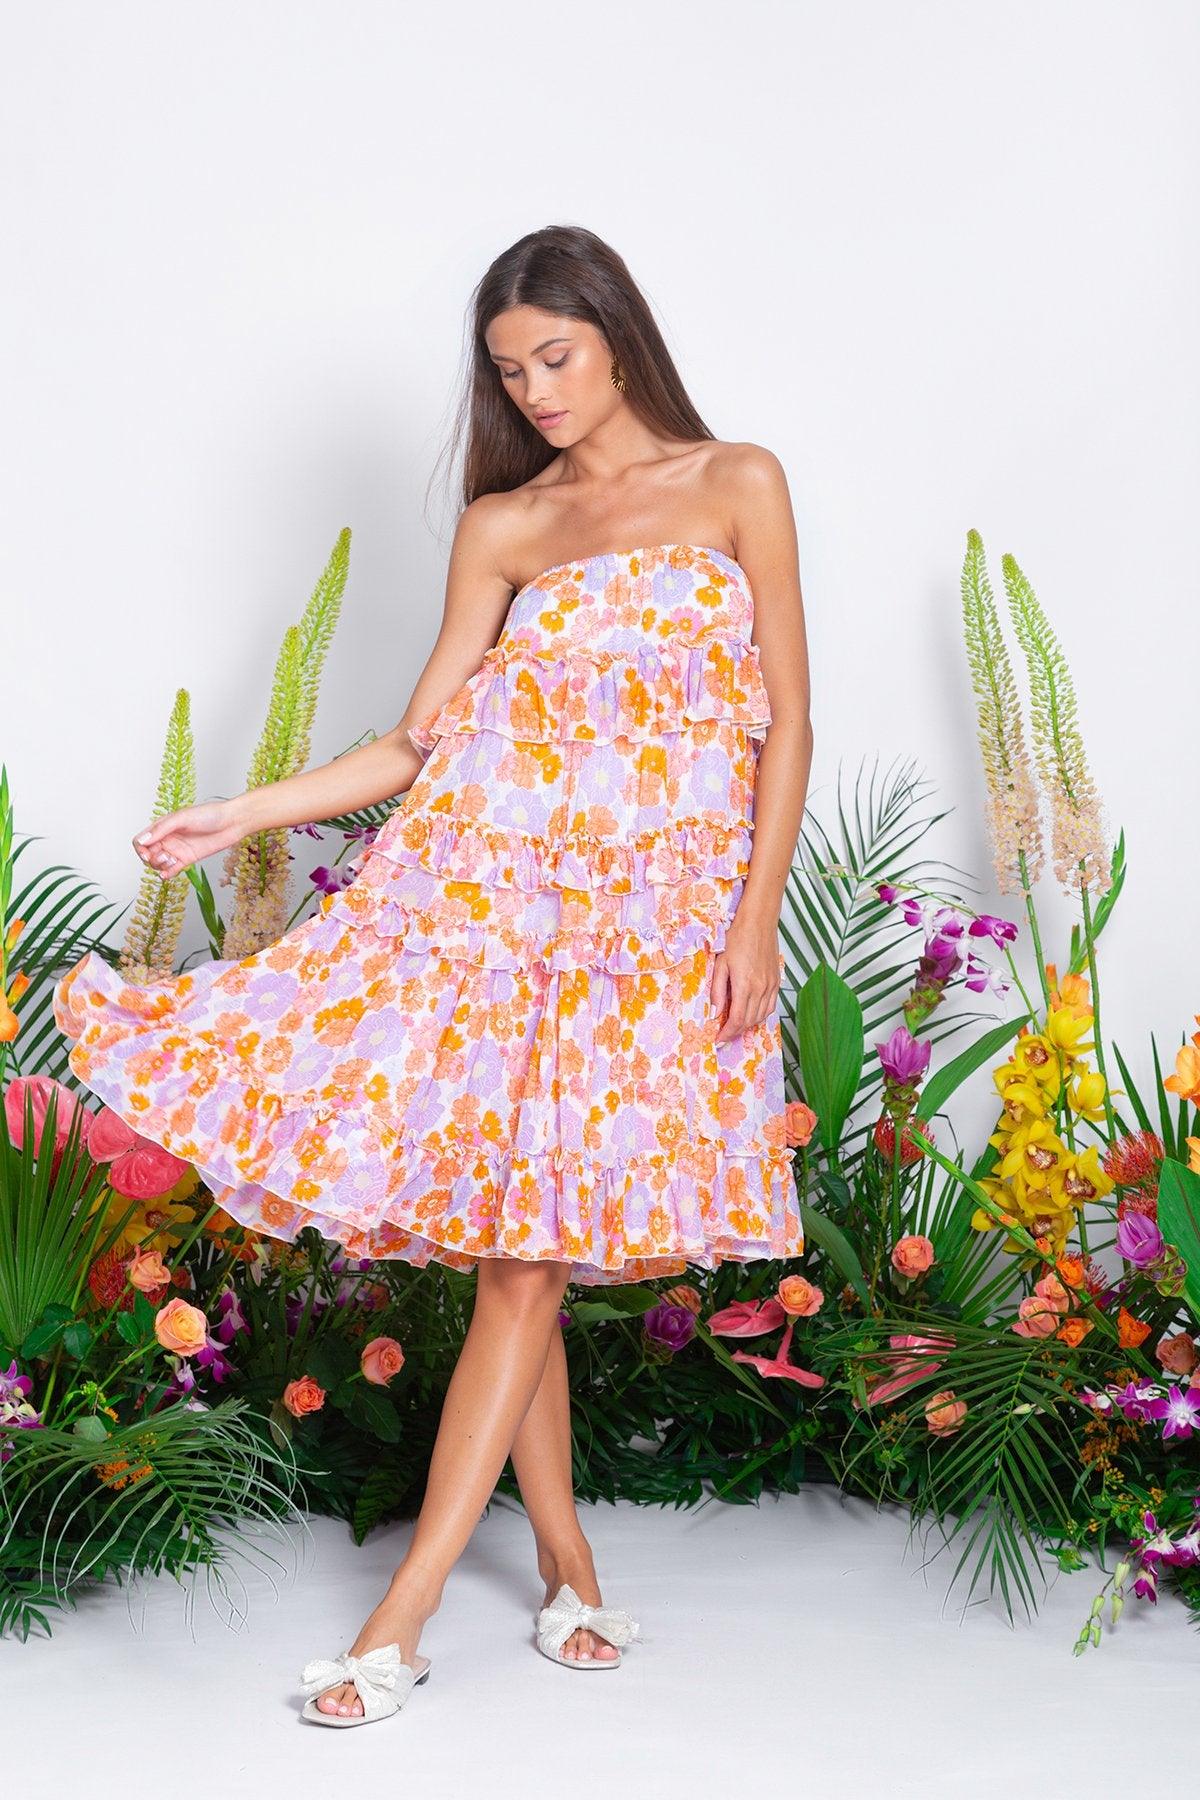 Berenice Layered Dress /Skirt in Floral print (2 in 1)